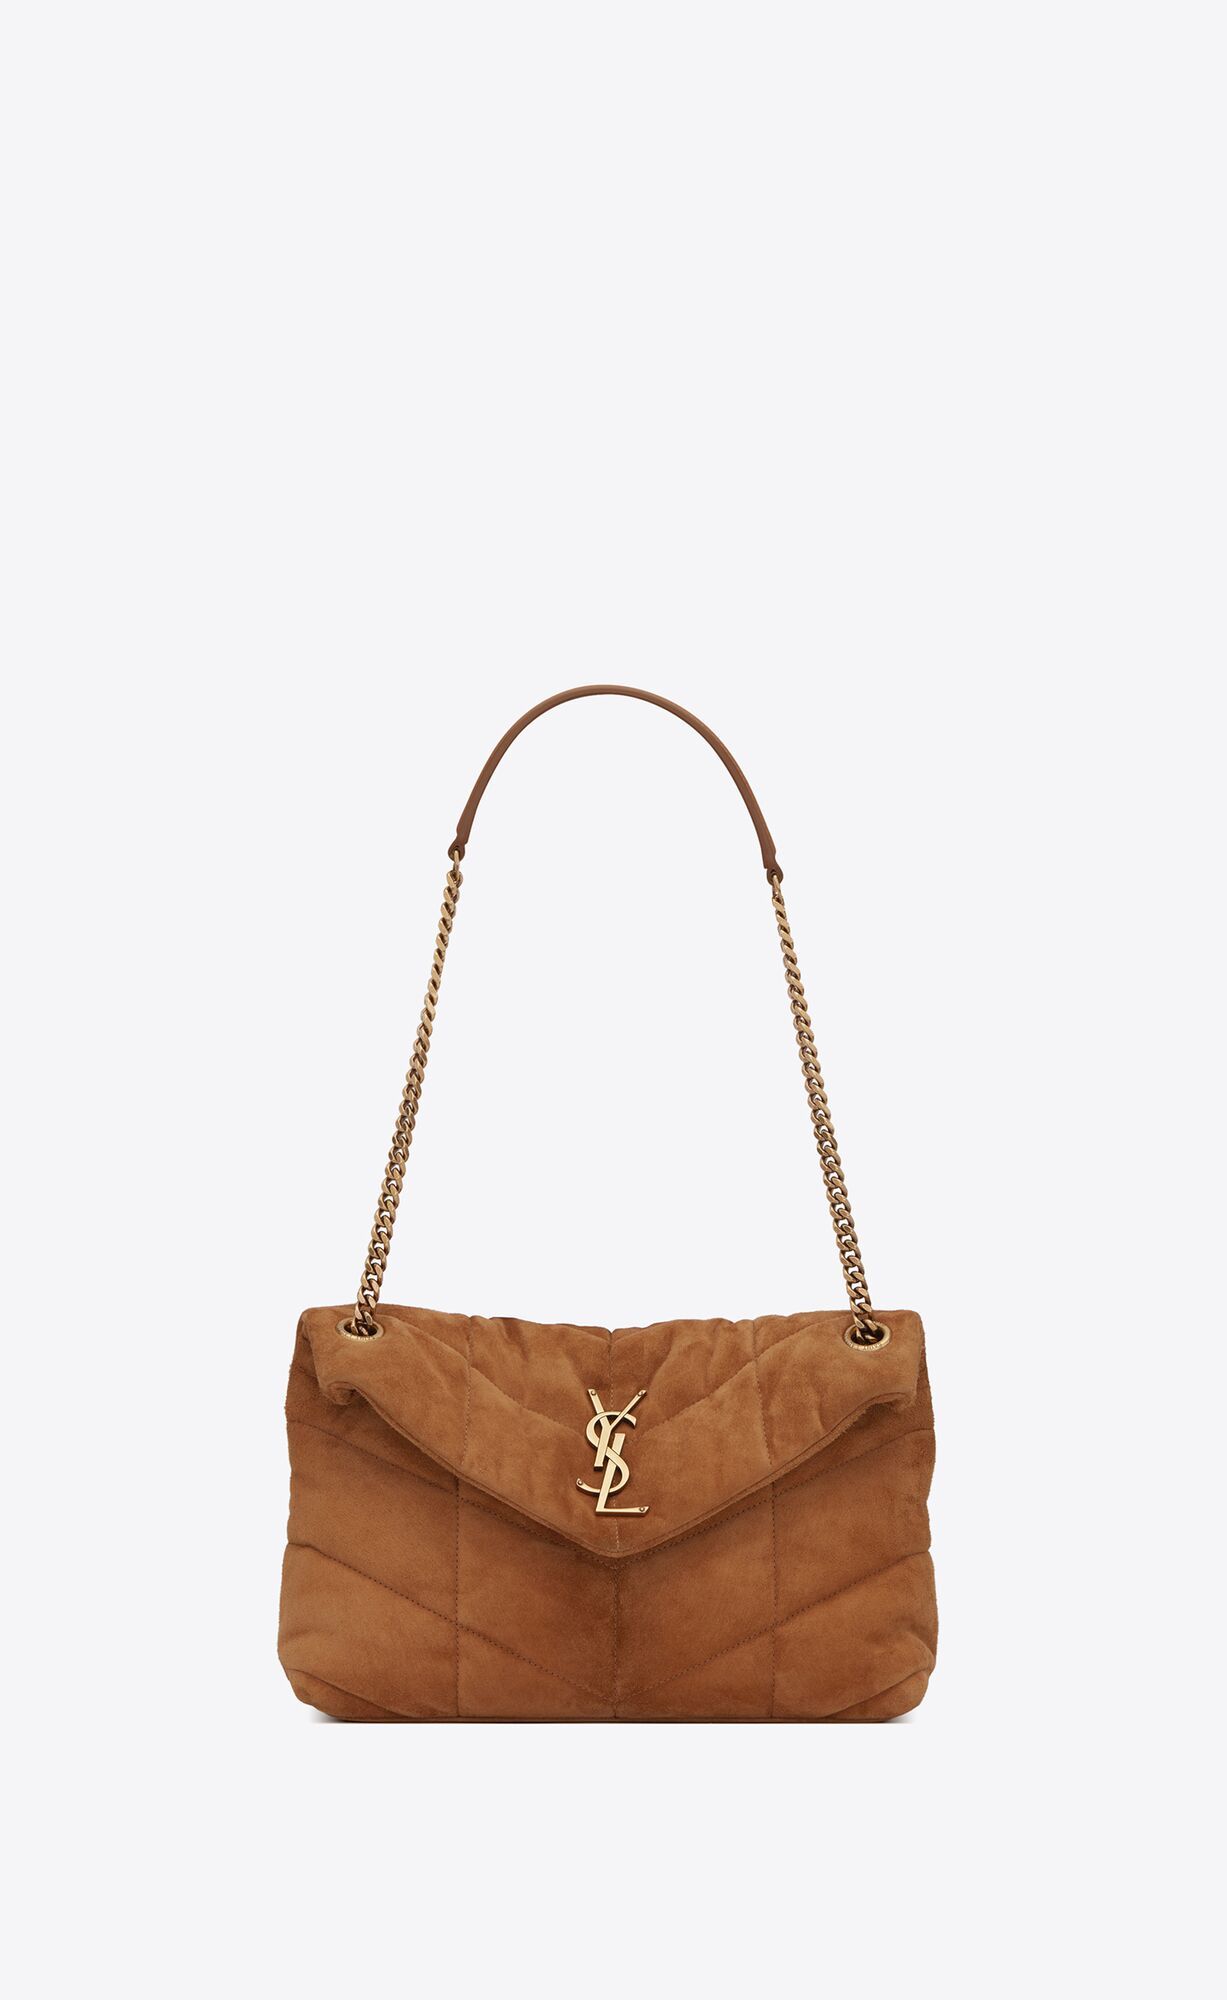 PUFFER Small bag in quilted suede | Saint Laurent | YSL.com | Saint Laurent Inc. (Global)